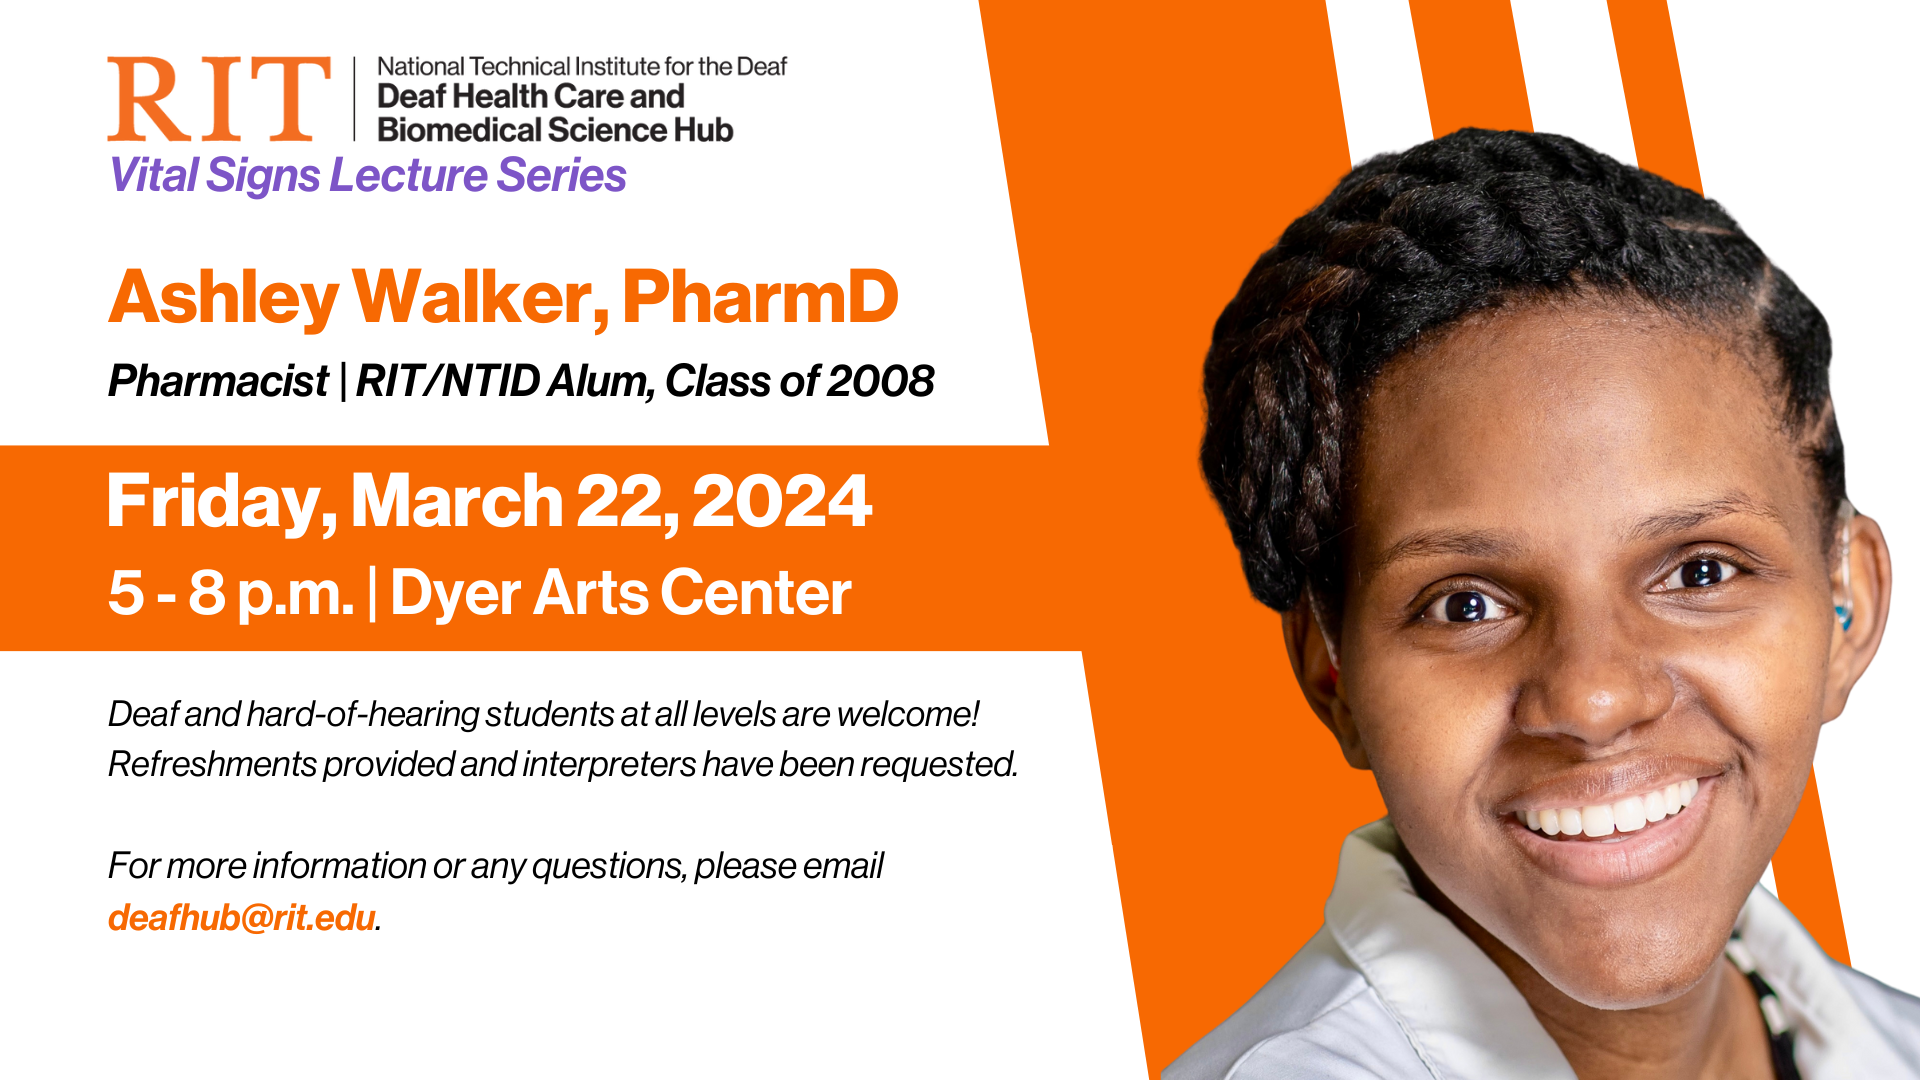 Dr. Ashley Walker's portrait is featured on the Deaf Hub's Vital Signs Lecture Series for her presentation on Friday, March 22, 2024 from 5 to 8 pm at the Dyer Arts Center.